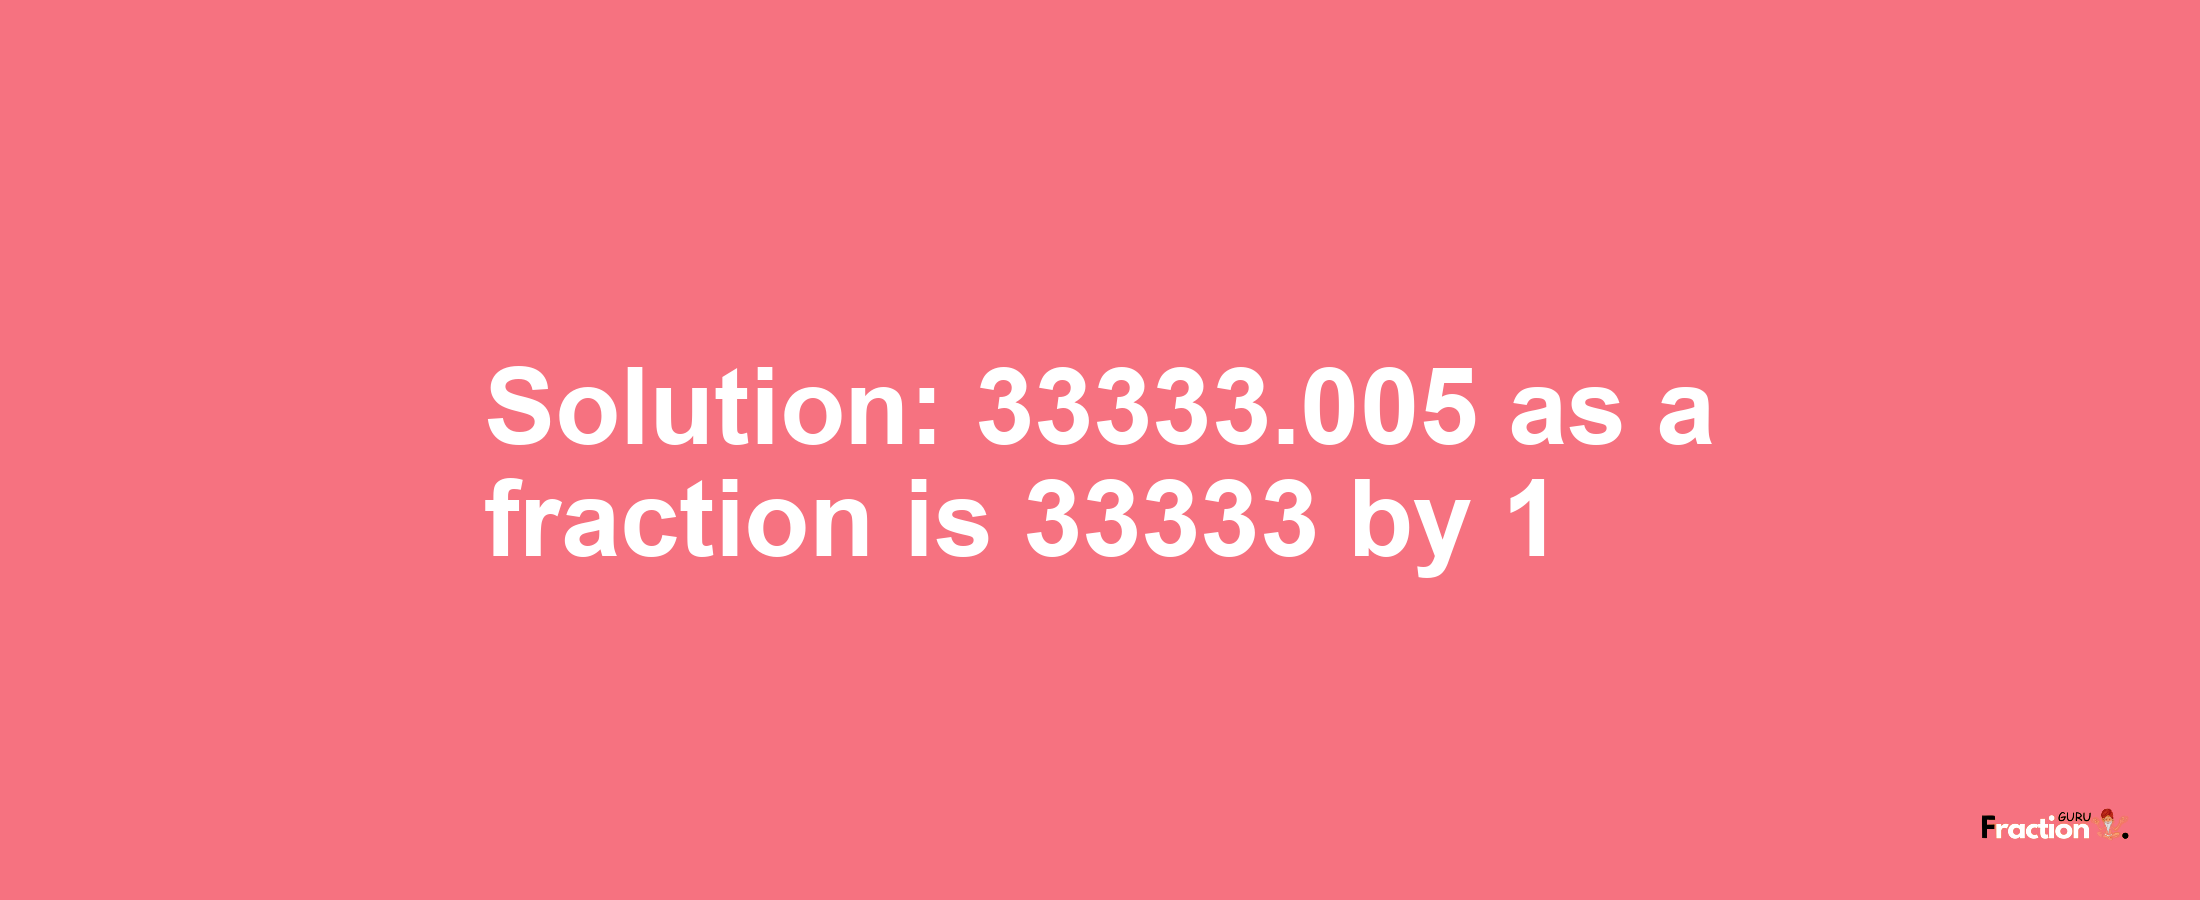 Solution:33333.005 as a fraction is 33333/1